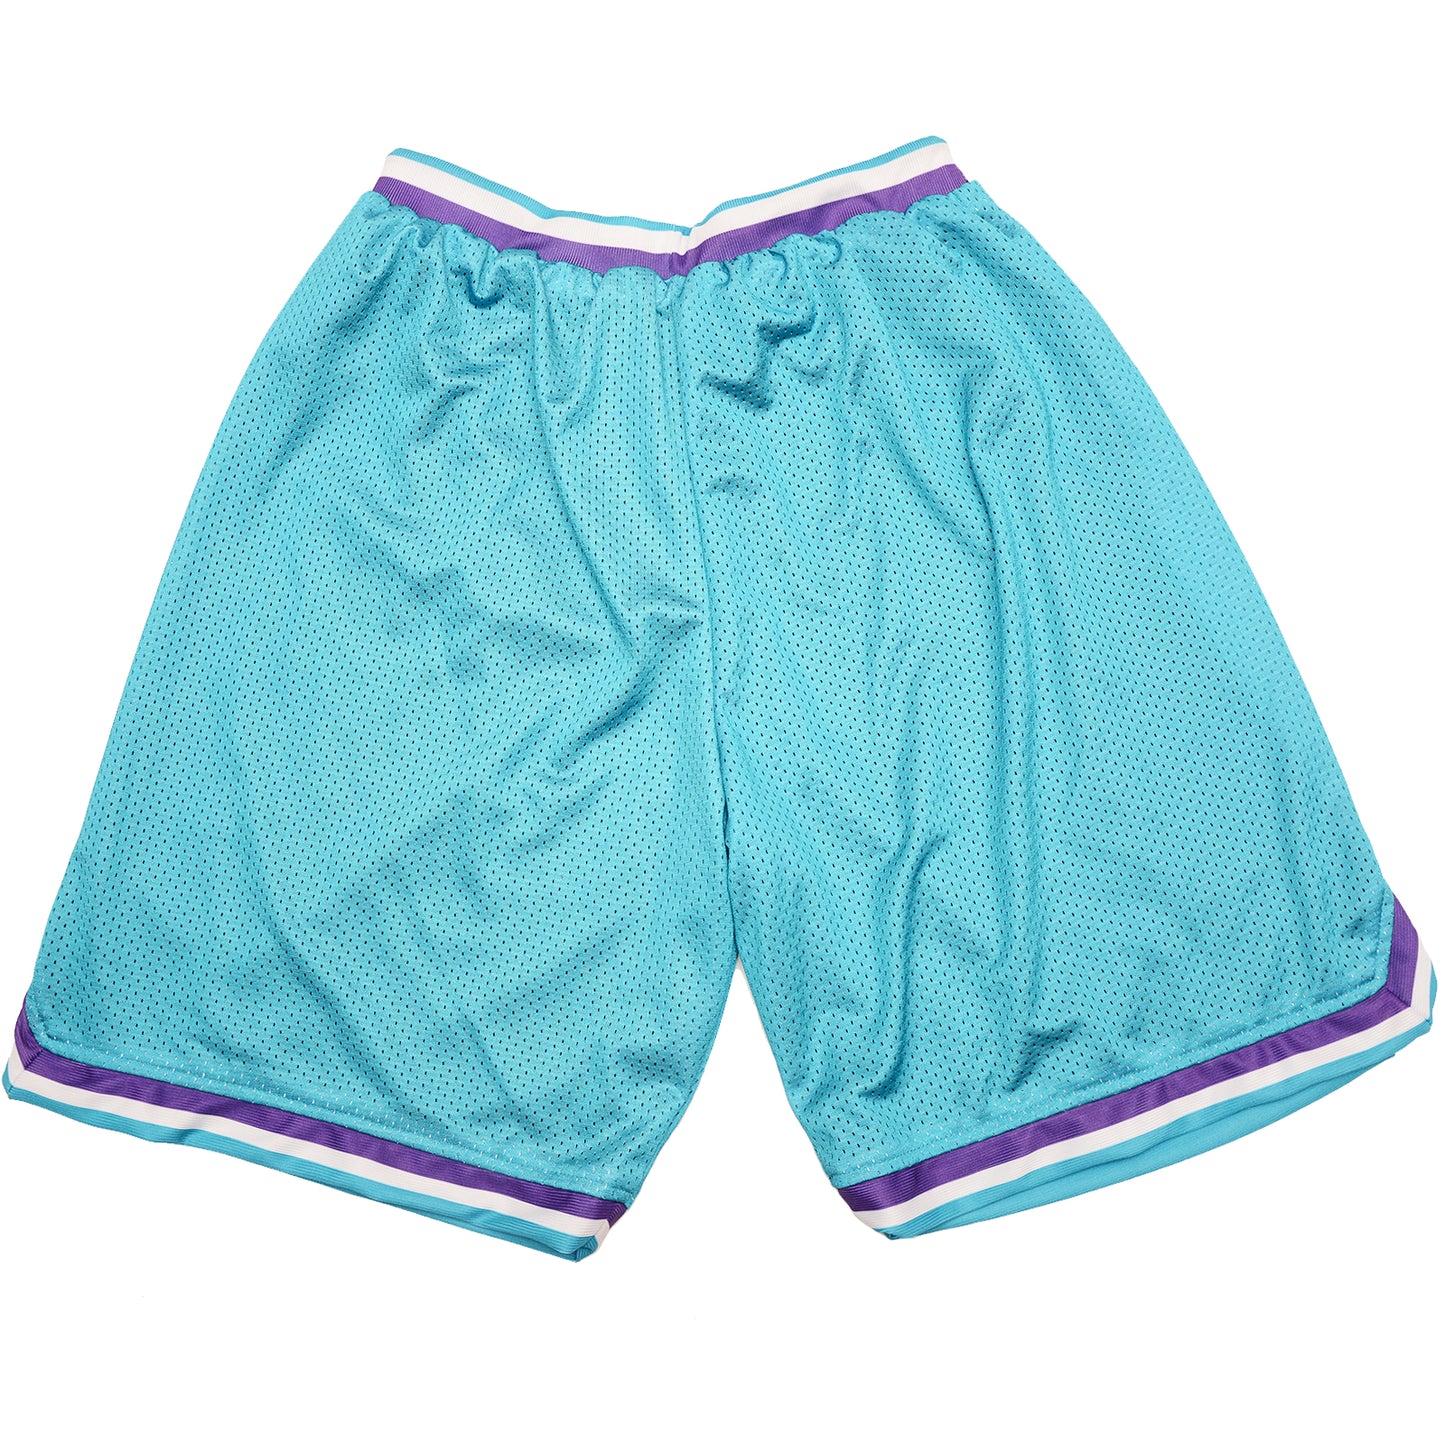 F4m Jam Shorts in Teal